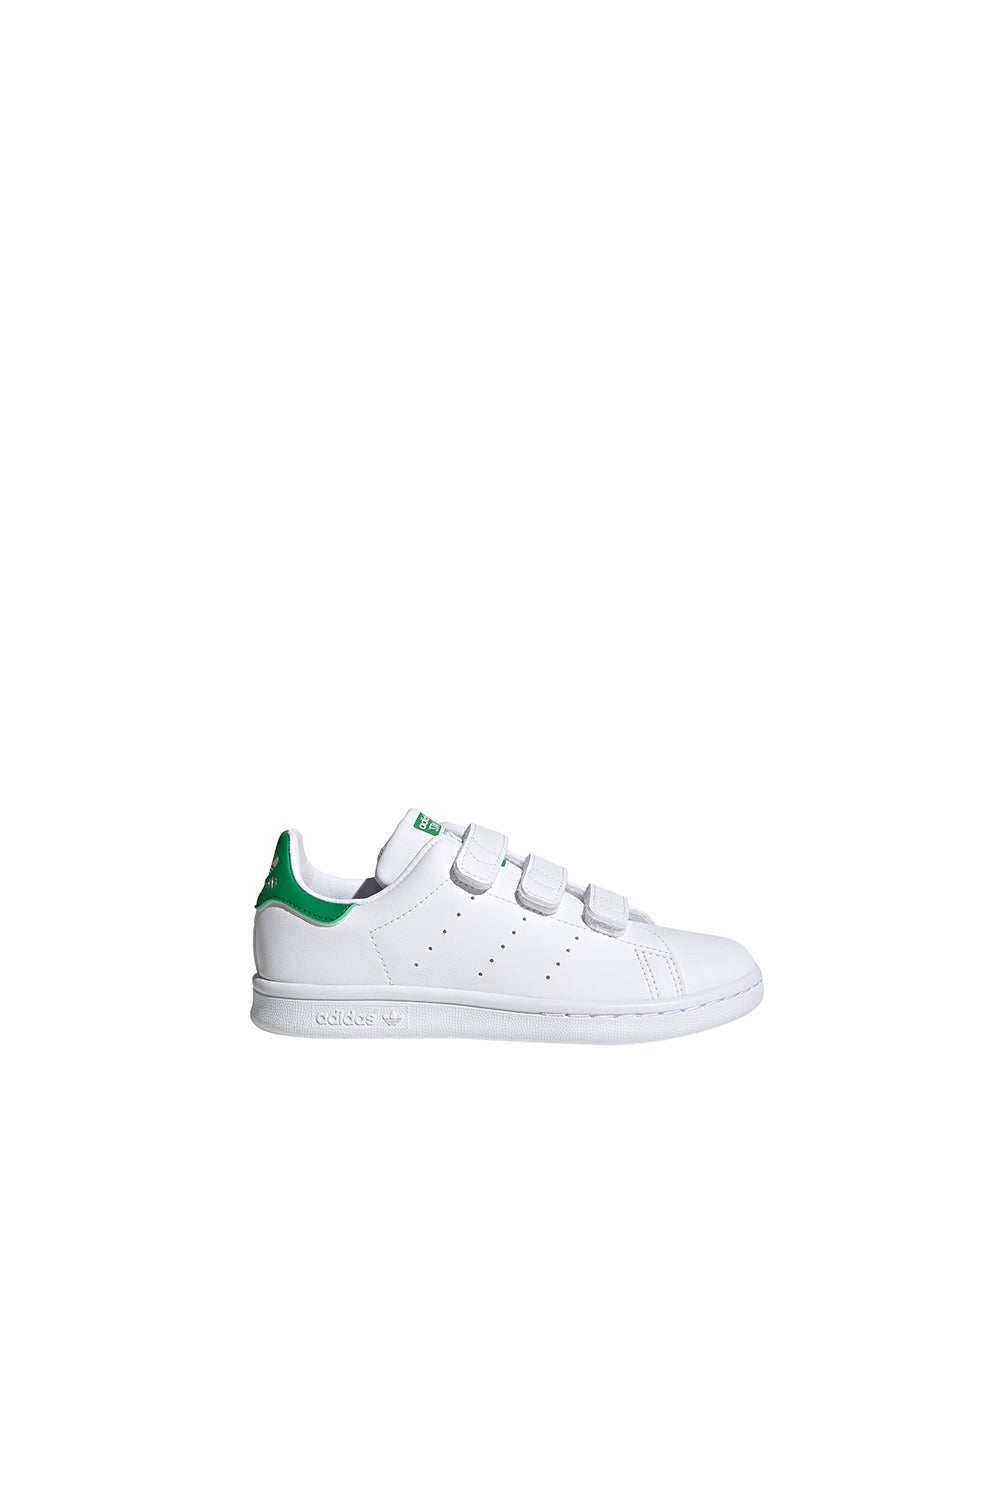 stan smith kid shoes